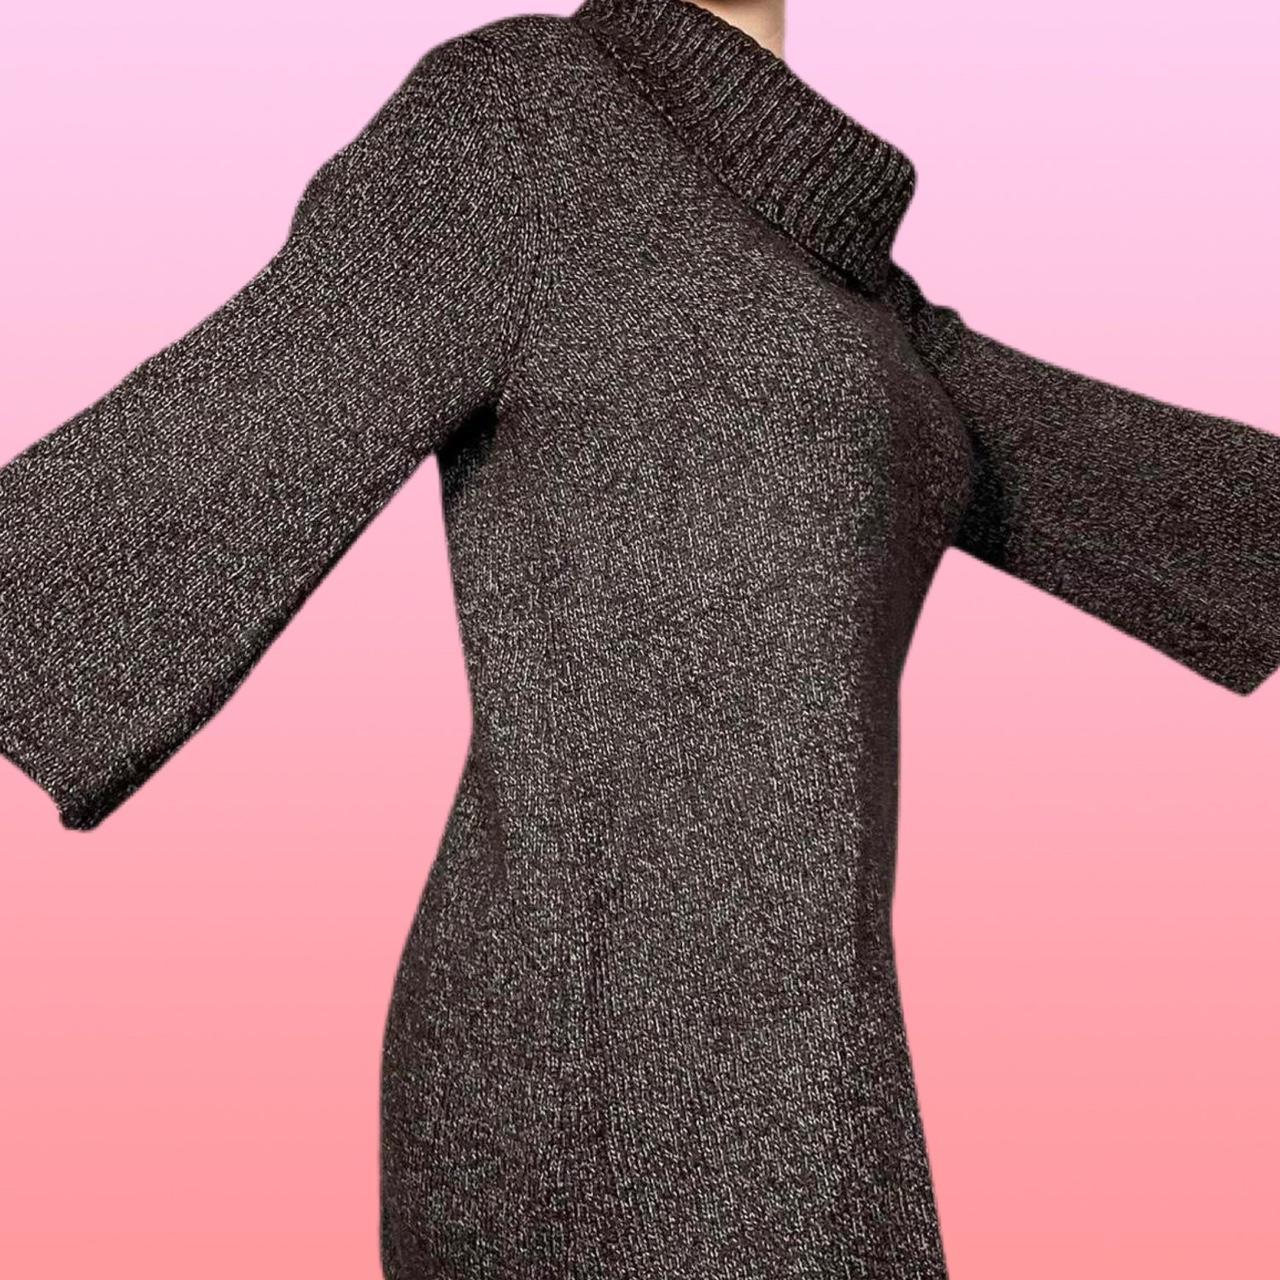 Product Image 3 - Knit Sweater Dress

🤠Bundle 2+ for